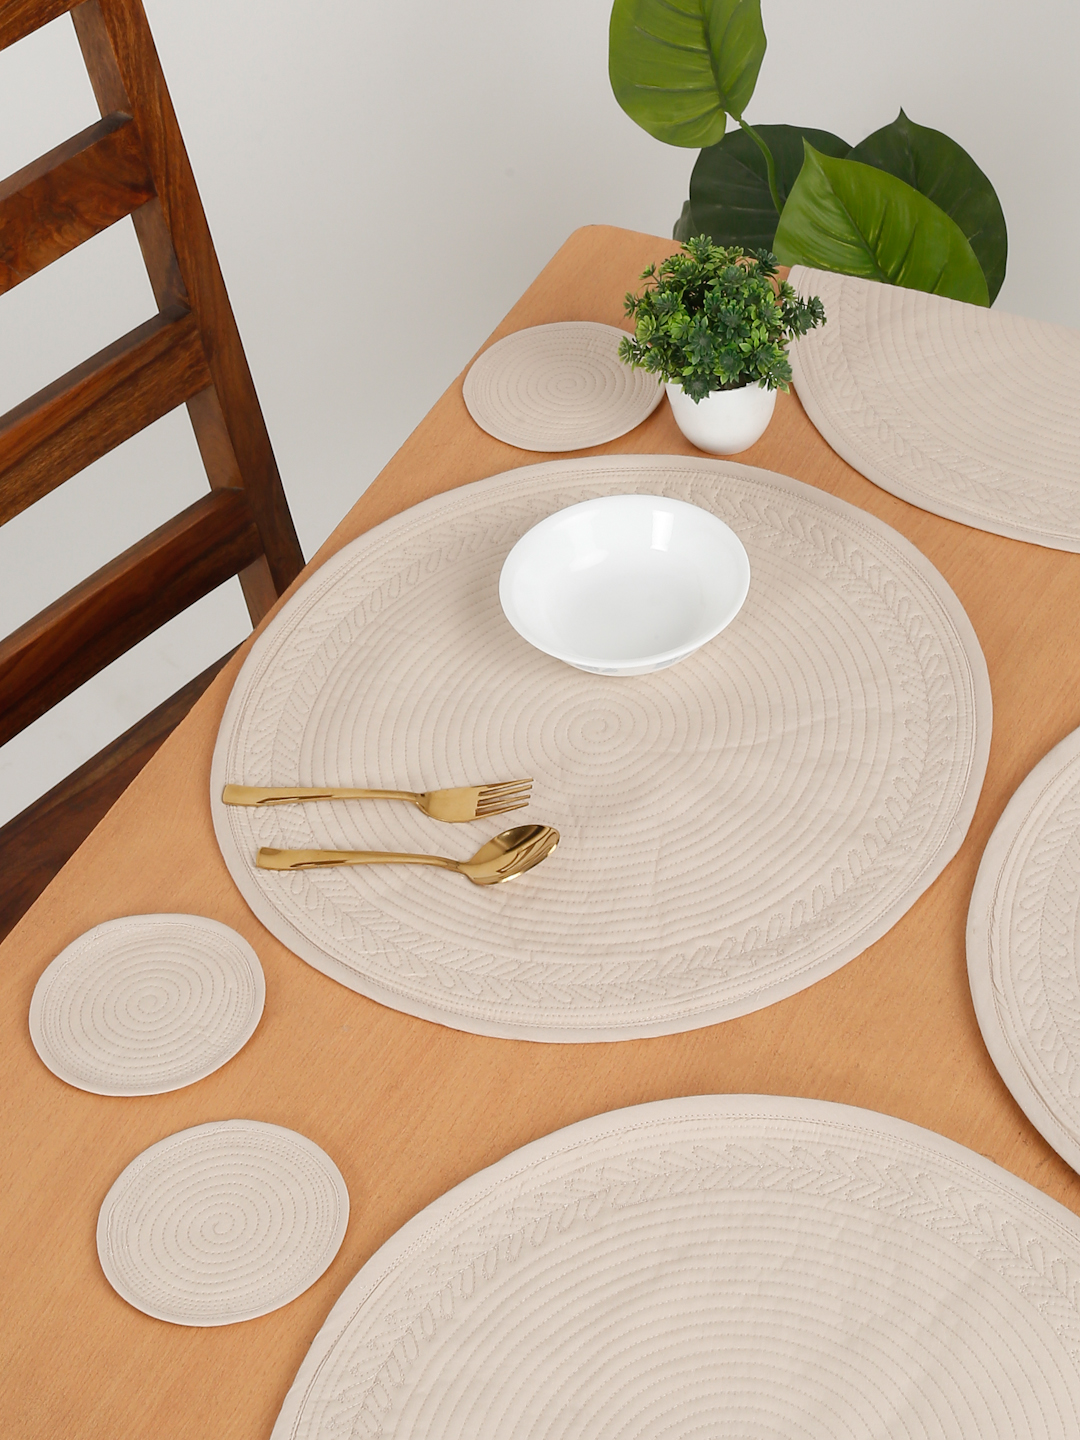 Set of 4 quilted cotton table placemats | handmade round table placemats